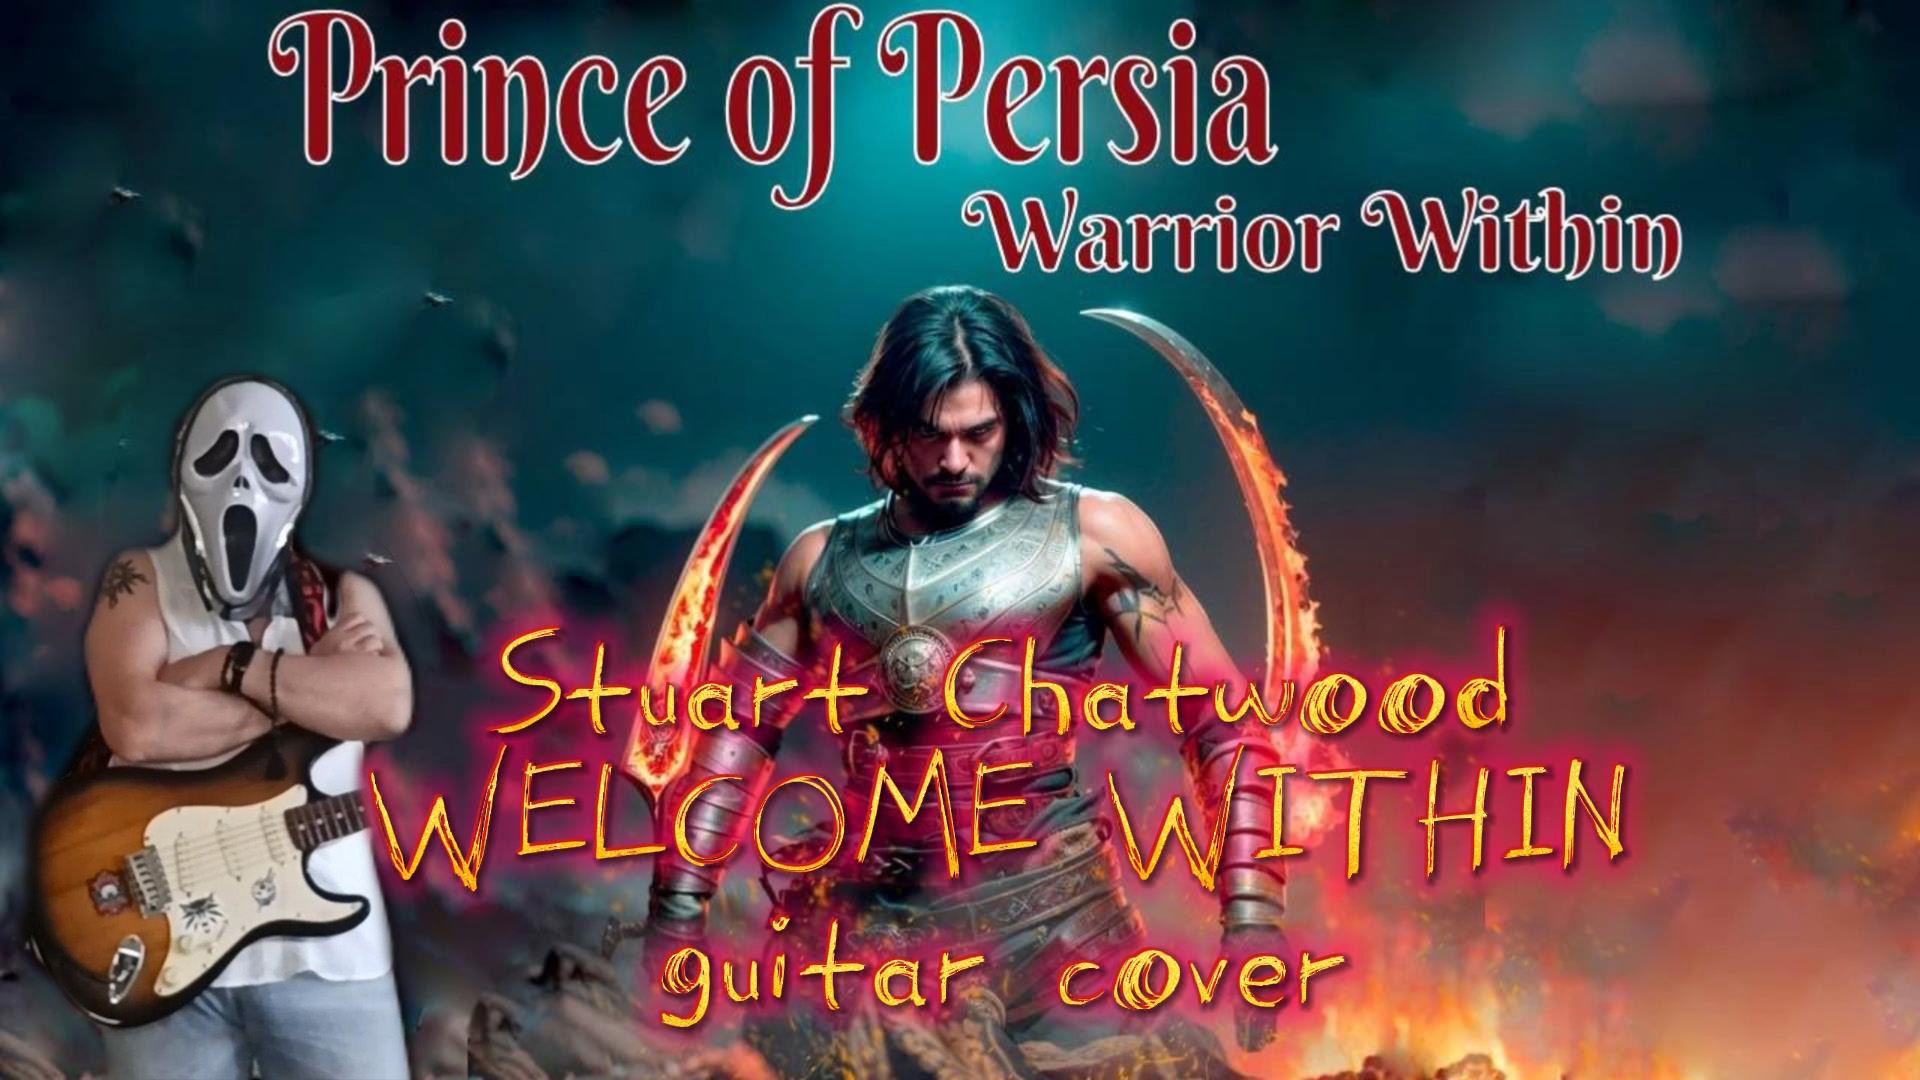 STUART CHATWOOD - POP2 WARRIOR WITHIN _WELCOME WITHIN (Guitar cover)